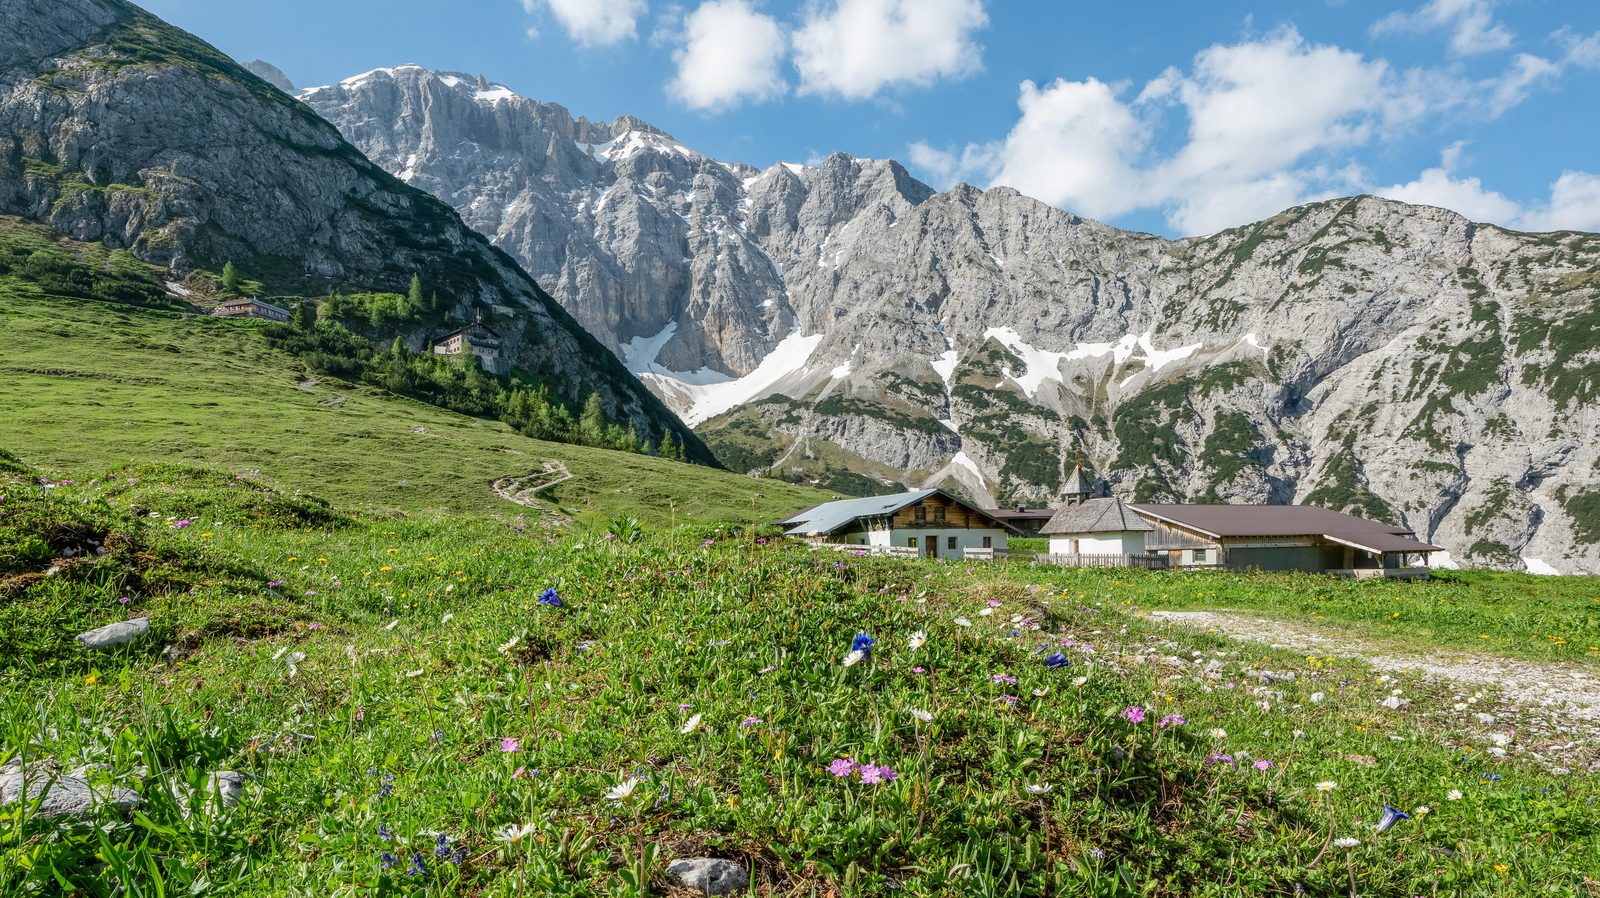 Head out on a last-minute vacation, and you might be in the Tyrolean Alps next week!